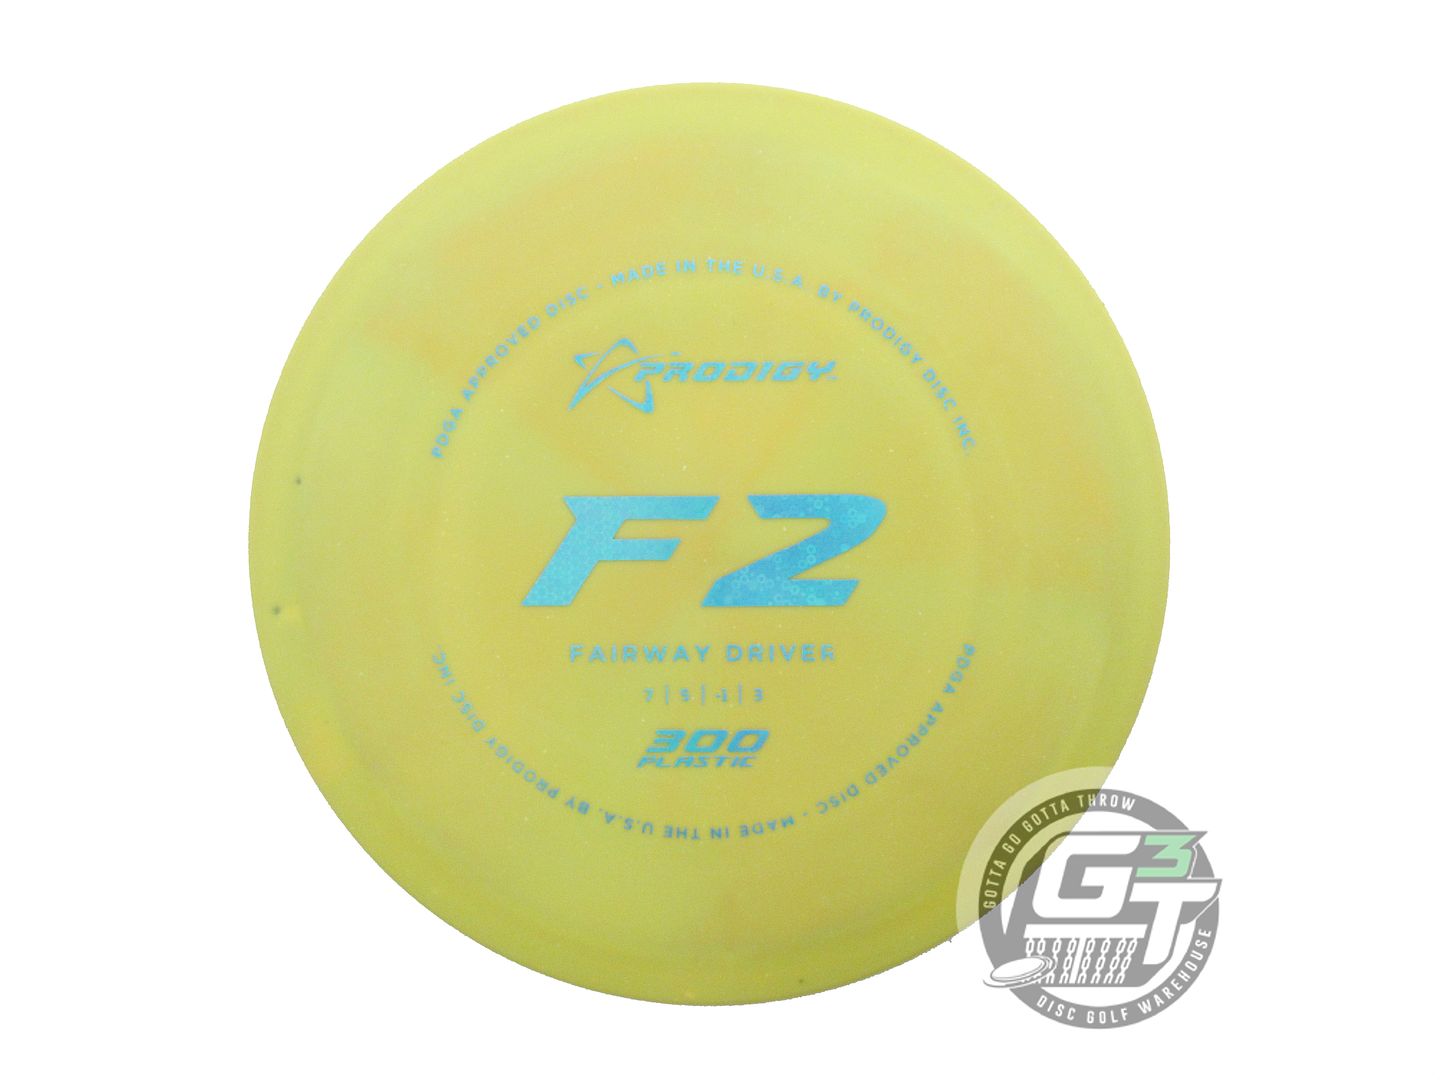 Prodigy 300 Series F2 Fairway Driver Golf Disc (Individually Listed)